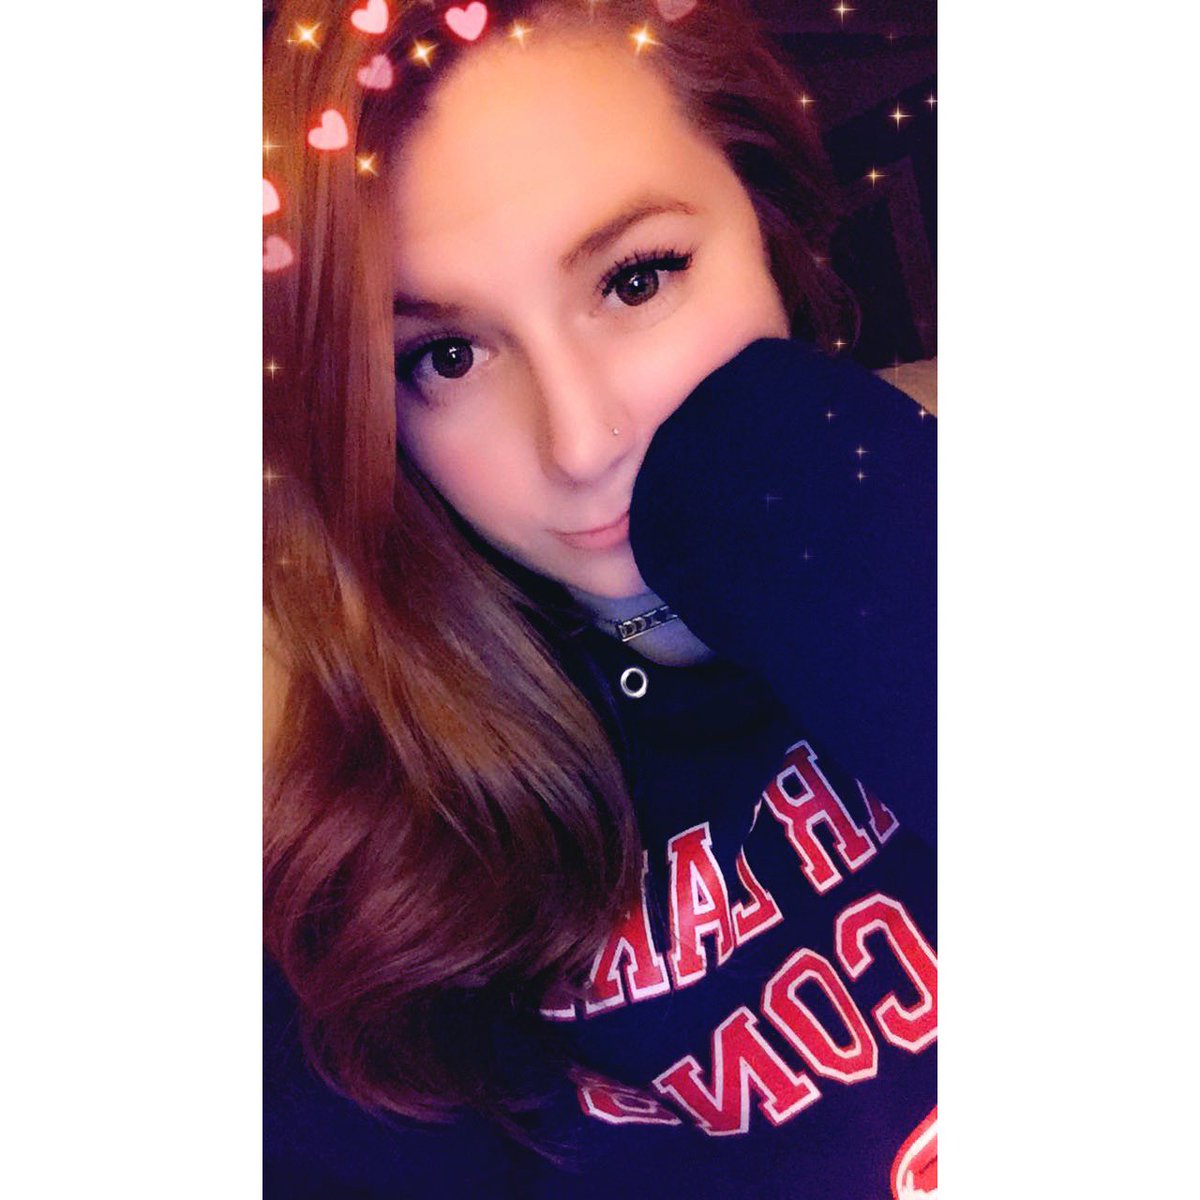 💕 twitch.tv/pawsytv 
I will support anyone where ever they go 💕  Insta: pawsytv 
•
•
•
•
#mixer #mixercommunity #twitch #twitchcommunity #facebookgaming #streamer